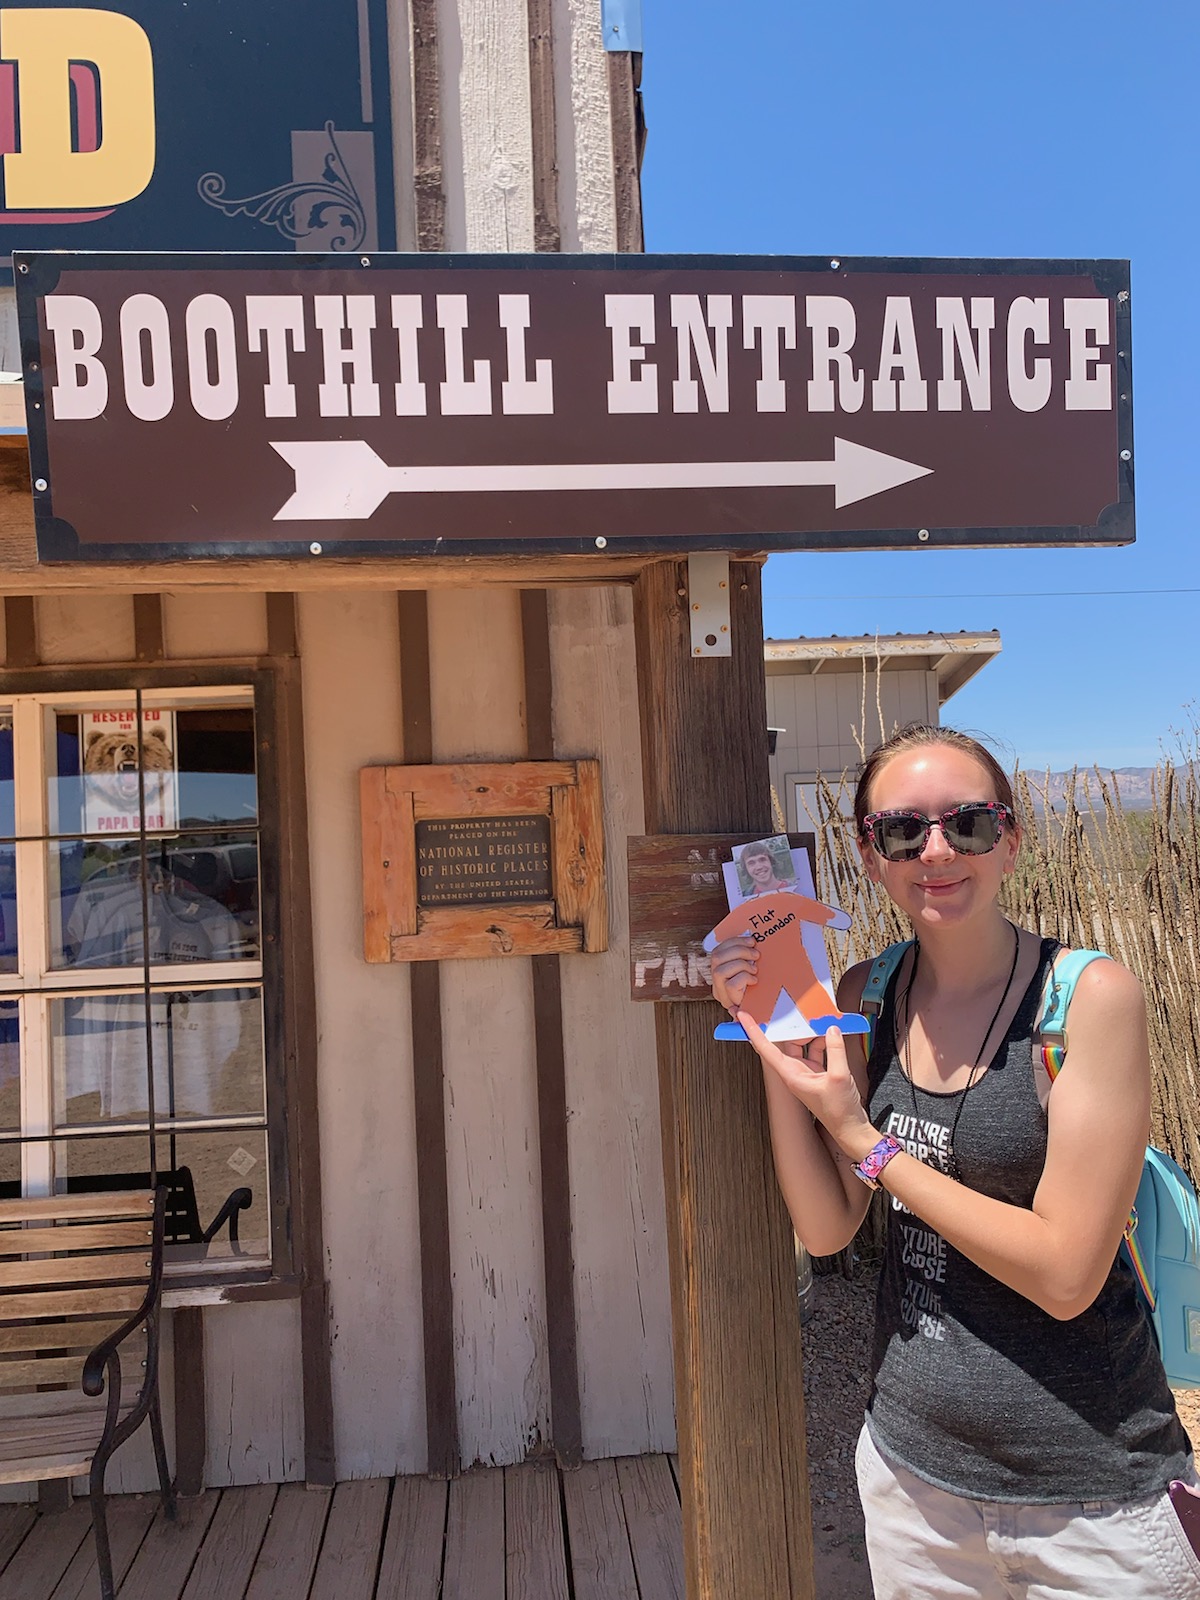 The Historian Outside the Entrance to Boothill